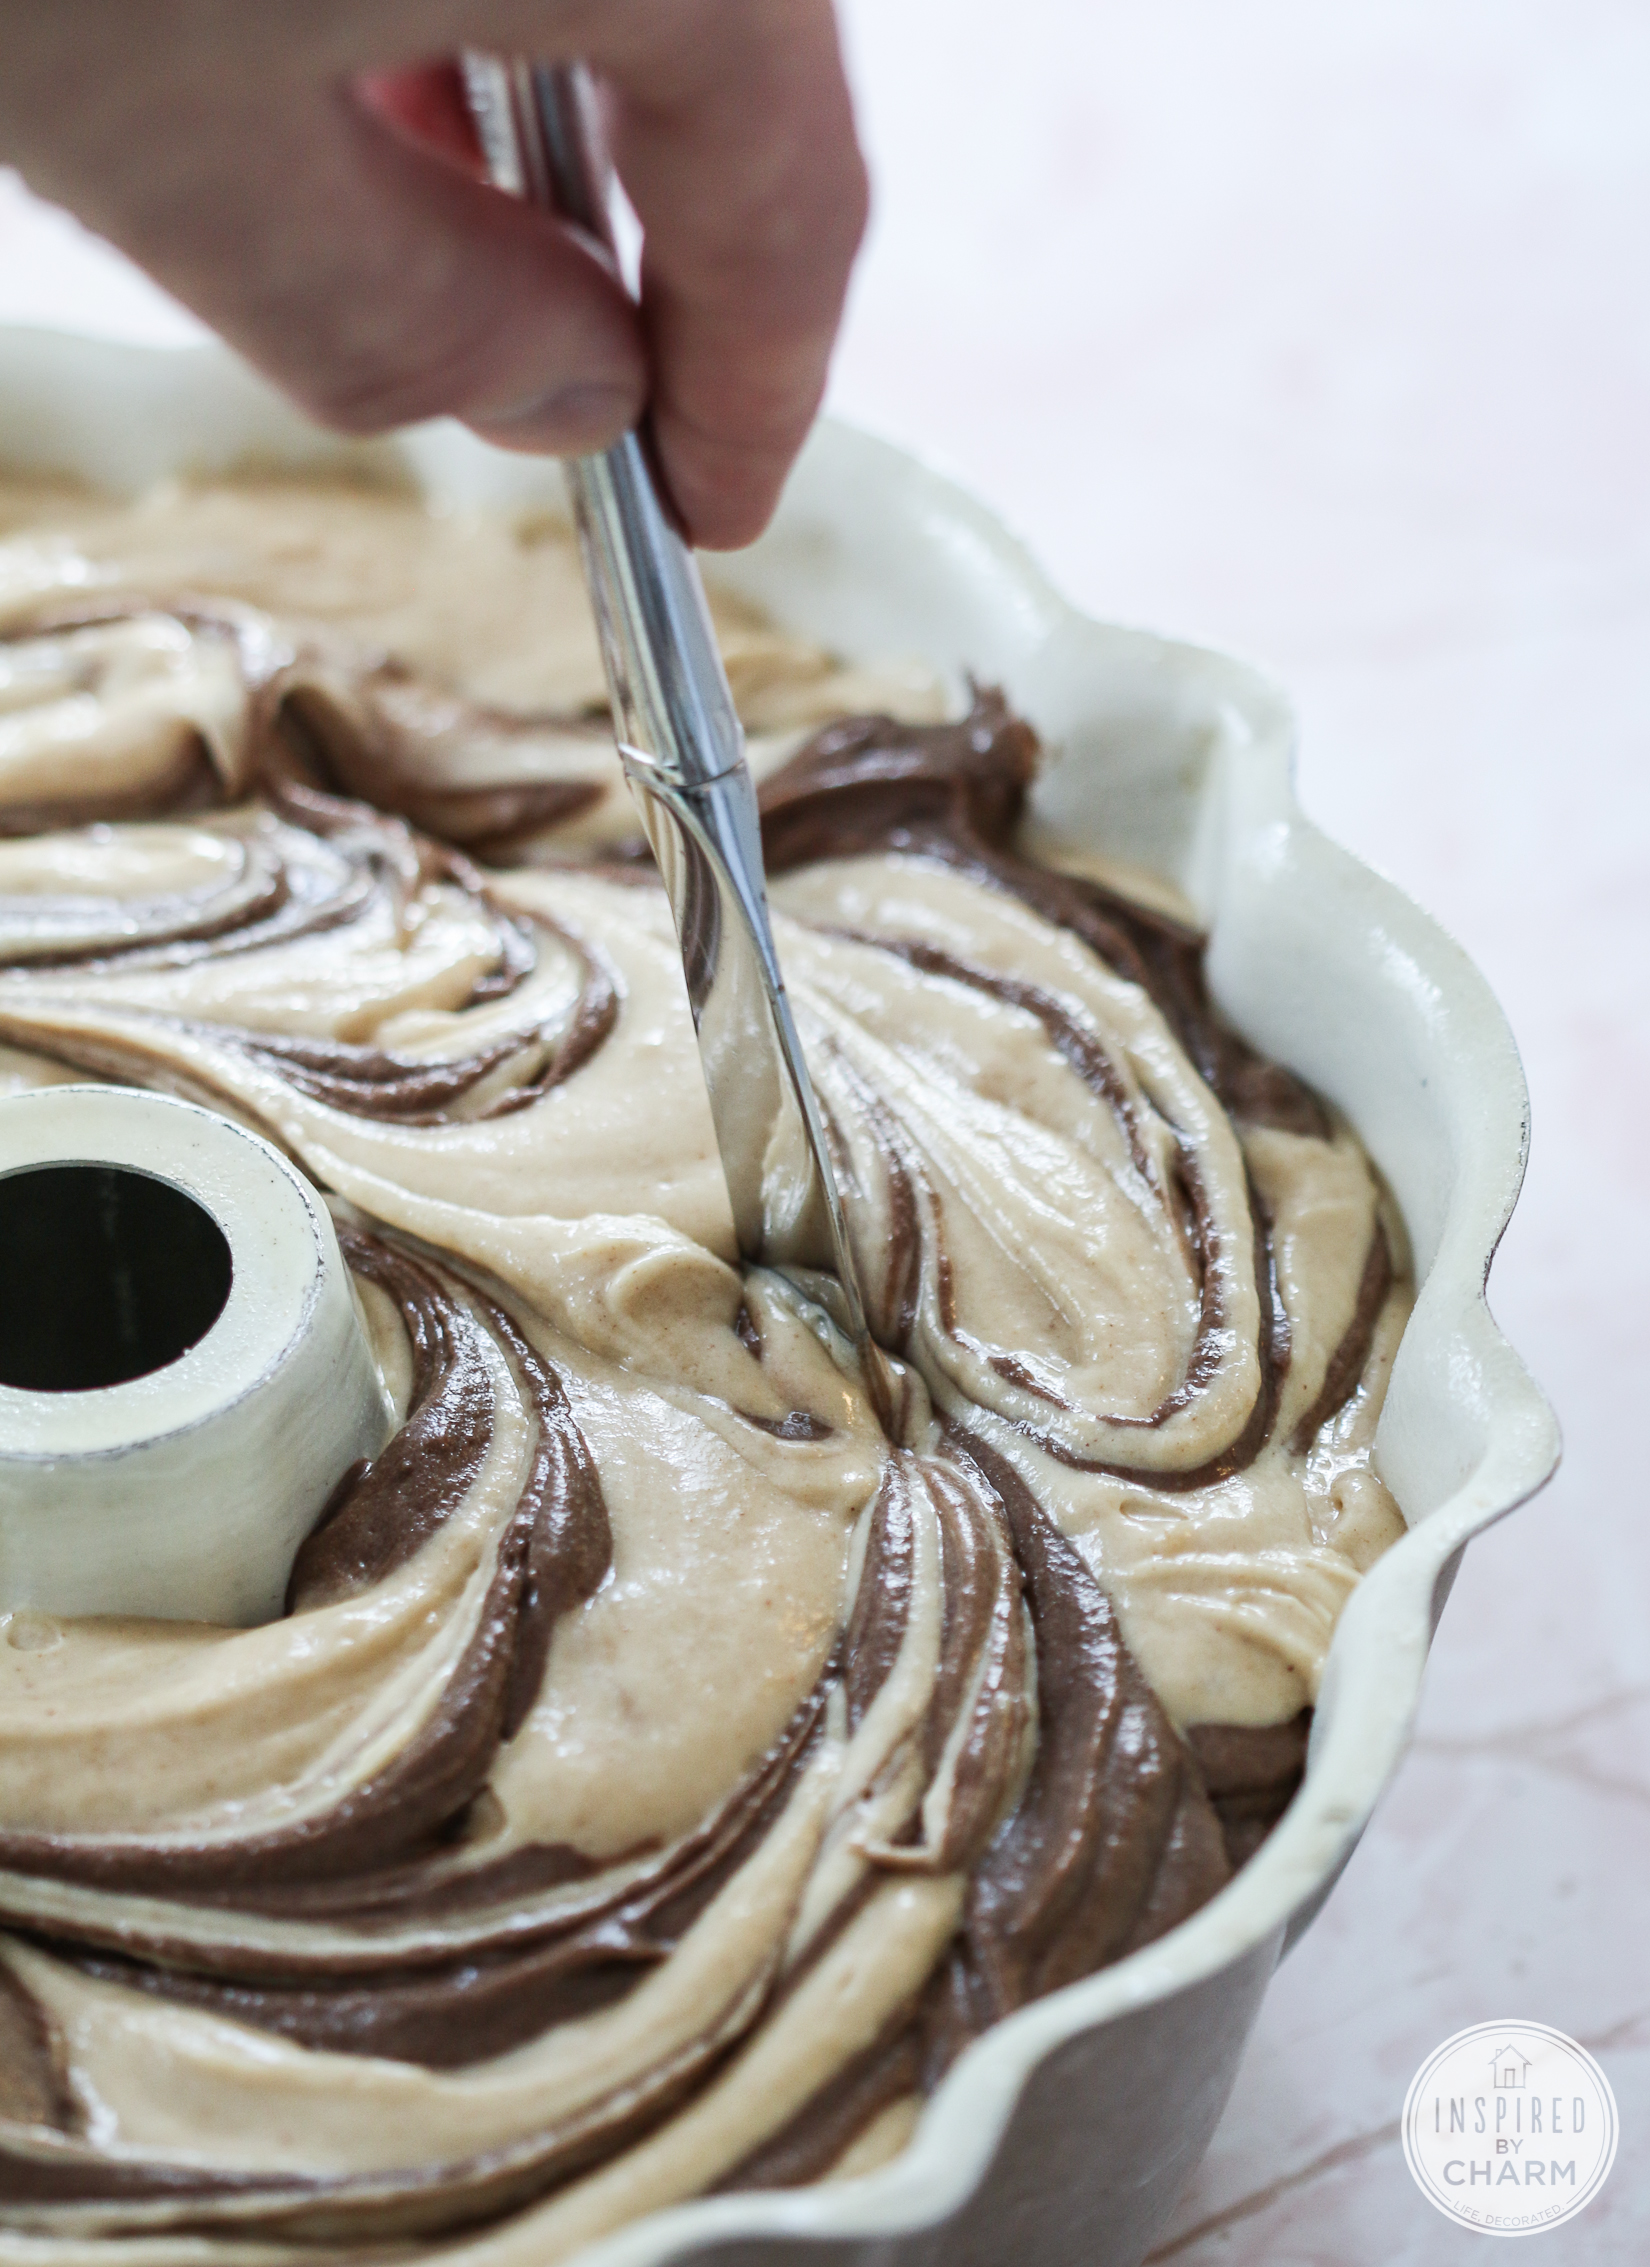 butter knife swirling together peanut butter cake batter and chocolate cake batter in a bundt pan.